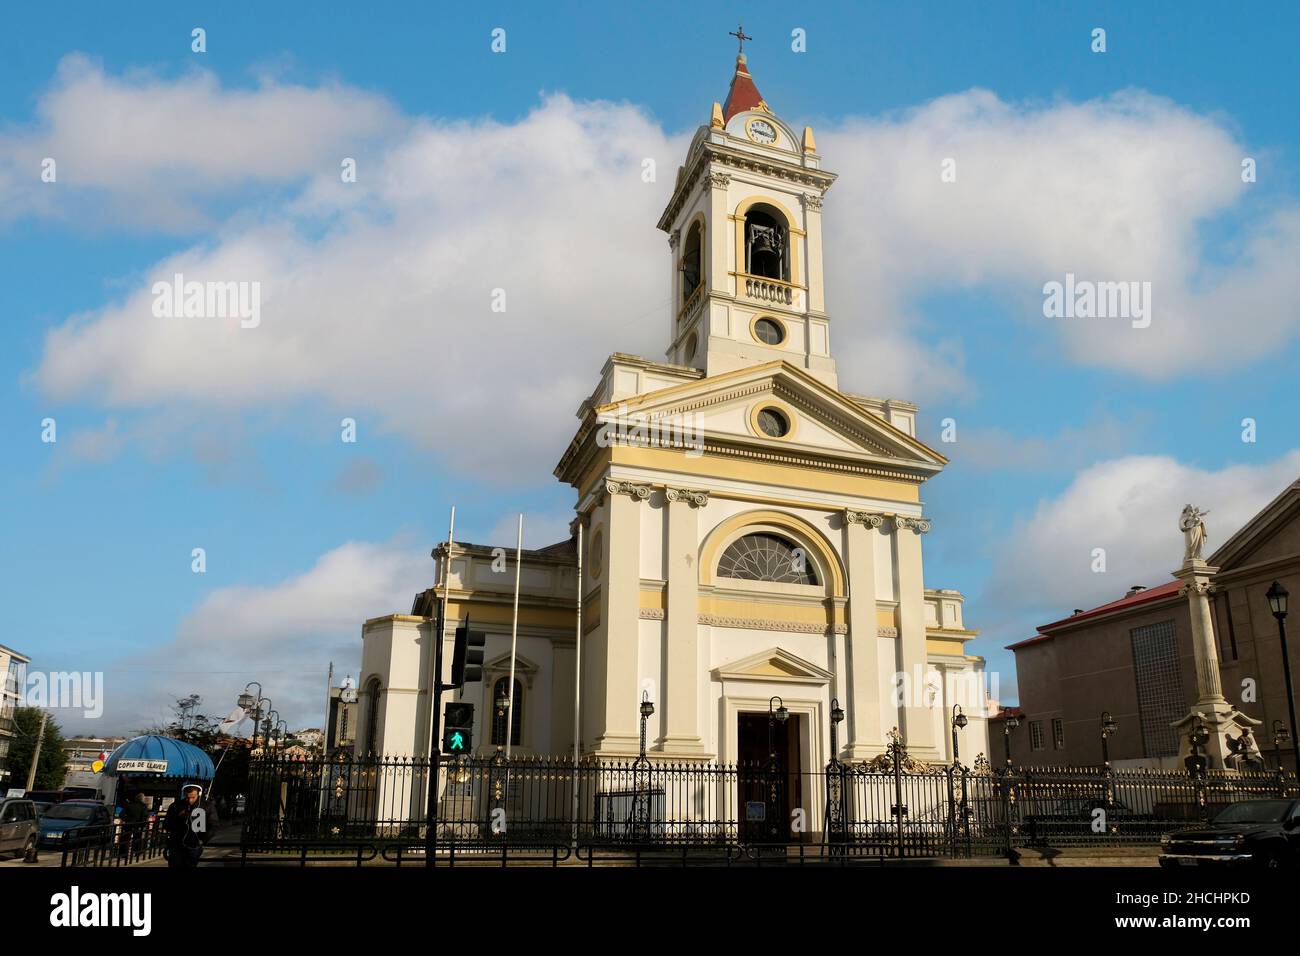 The Sacred Heart Cathedral  in Punta Arenas, Plaza de Armas, Punta Arenas Chile Stock Photo